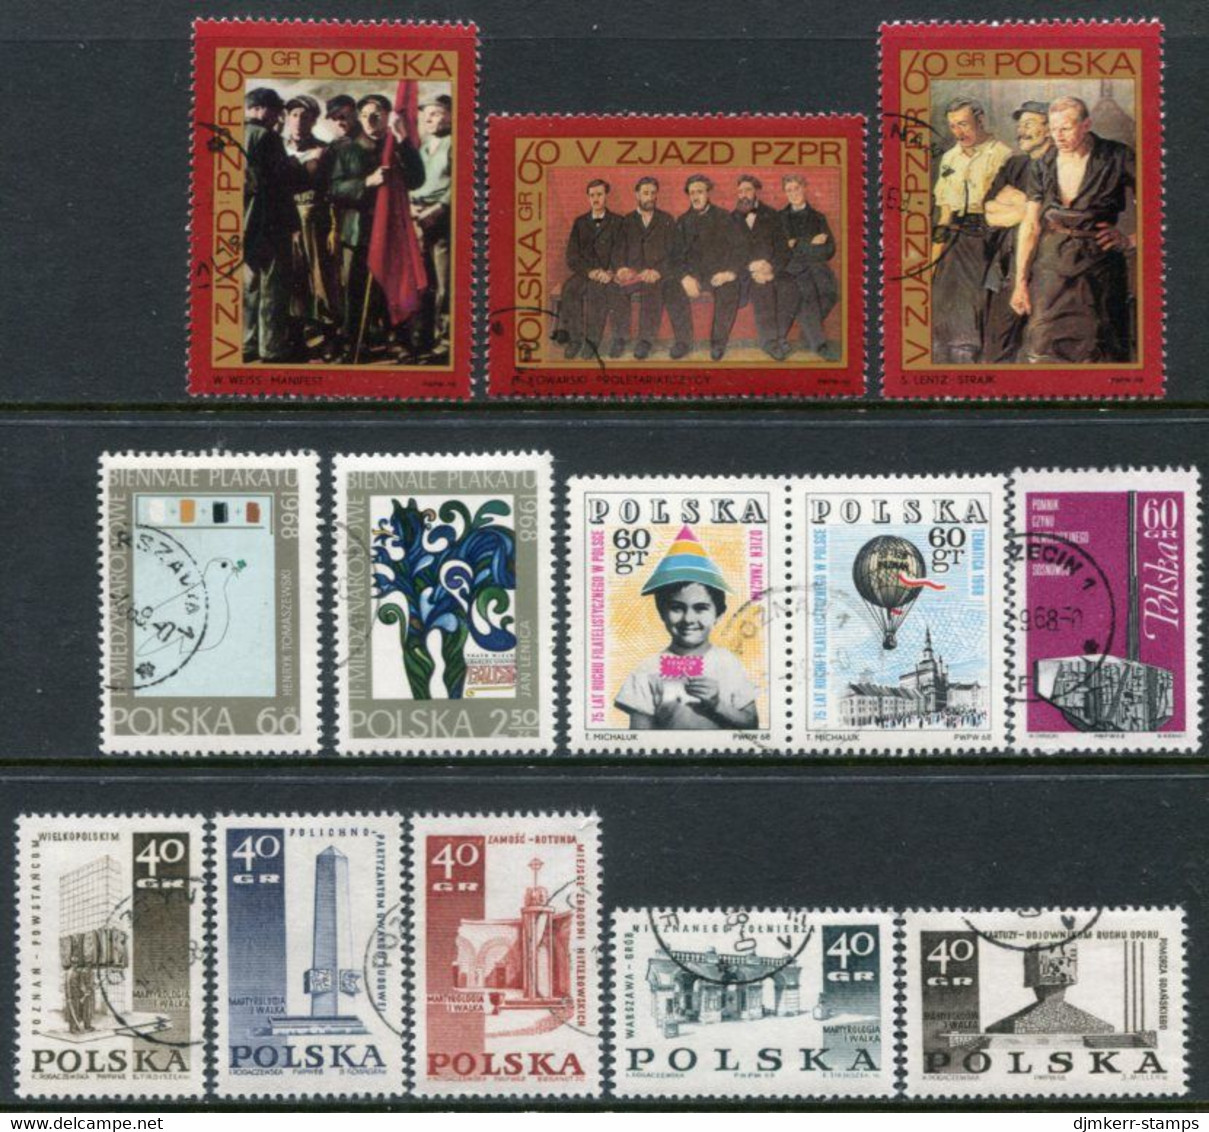 POLAND 1968 Five Complete Issues Used. - Used Stamps